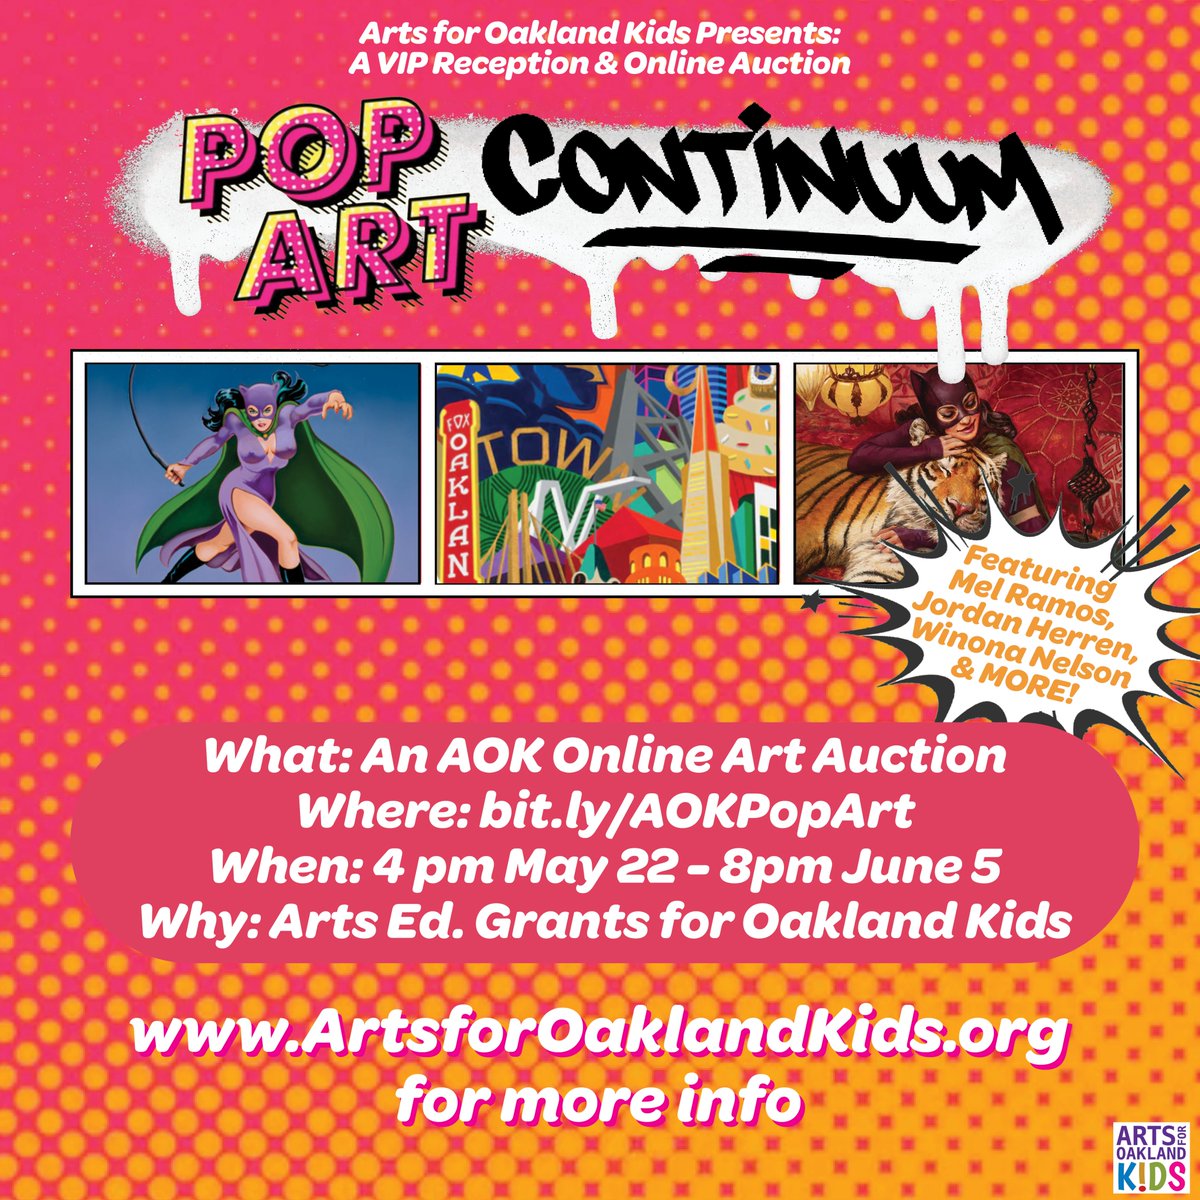 Don’t touch that dial! From 4pm May 22 - 8pm June 5, 2022, enter the #PopArt Continuum, an Online #ArtAuction featuring #MelRamos! The preview launches May 16 at bit.ly/AOKPopArt— head there now to find out more about the artists, including @thetracypiper & @winonanelson